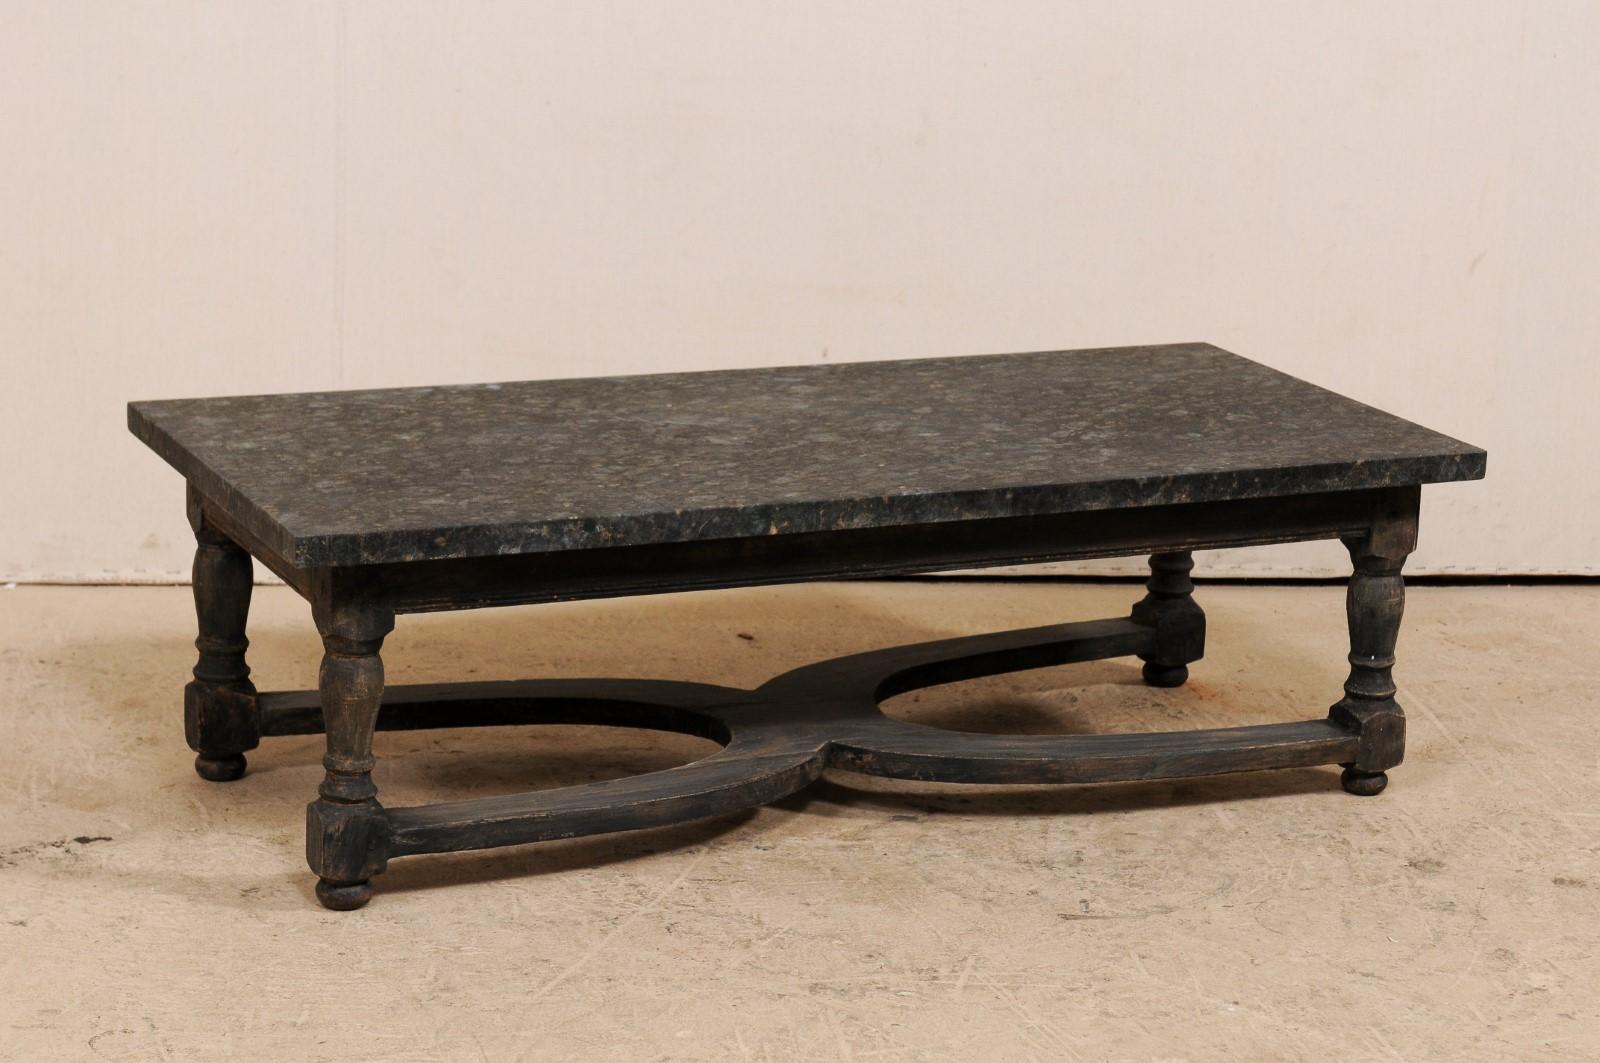 A Swedish 19th century painted wood coffee table with newer granite top. This 19th century table from Sweden features a rectangular-shape, overhanging top granite top, above a straight skirt, and has is raised up on four nicely turned legs. The